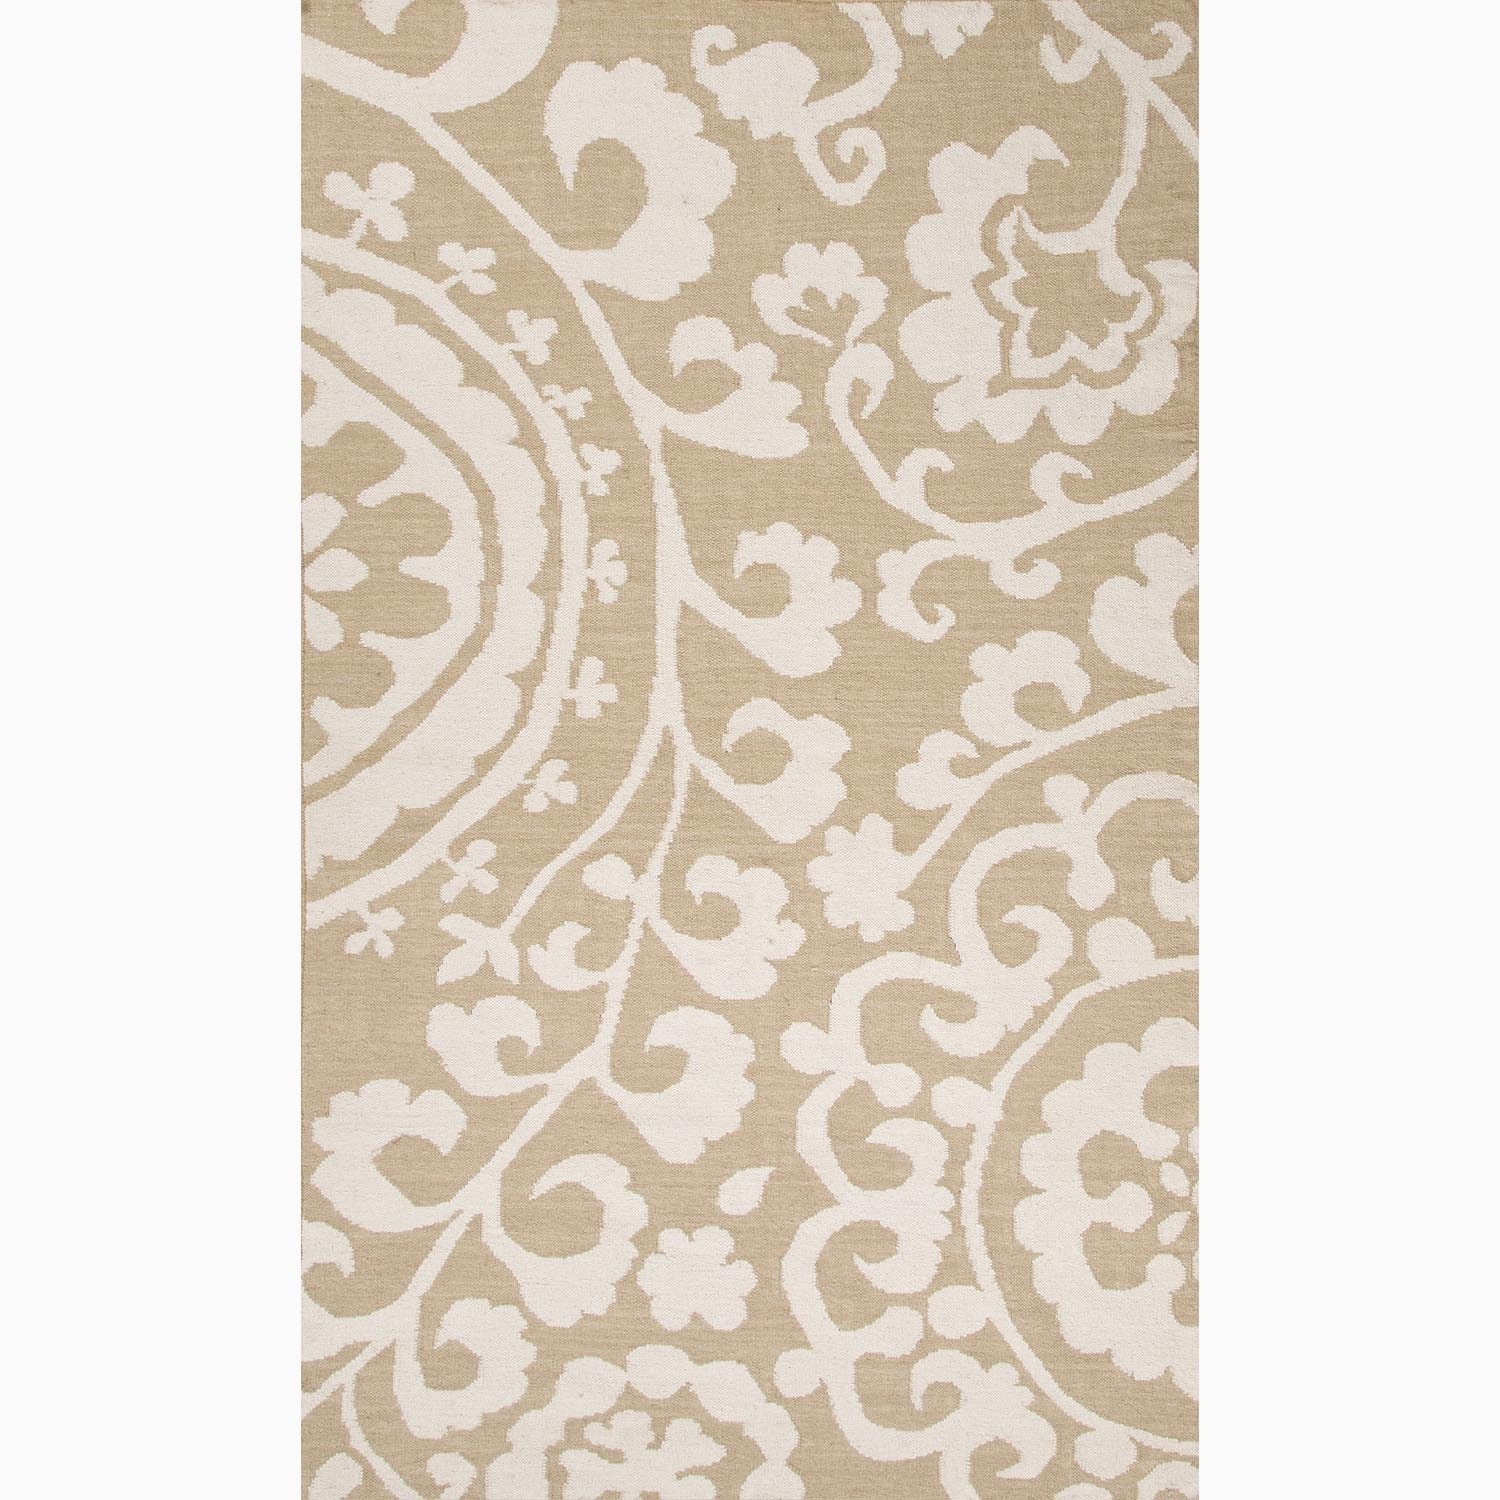 Hand made Floral Pattern Taupe/ Ivory Wool Rug (9x12)